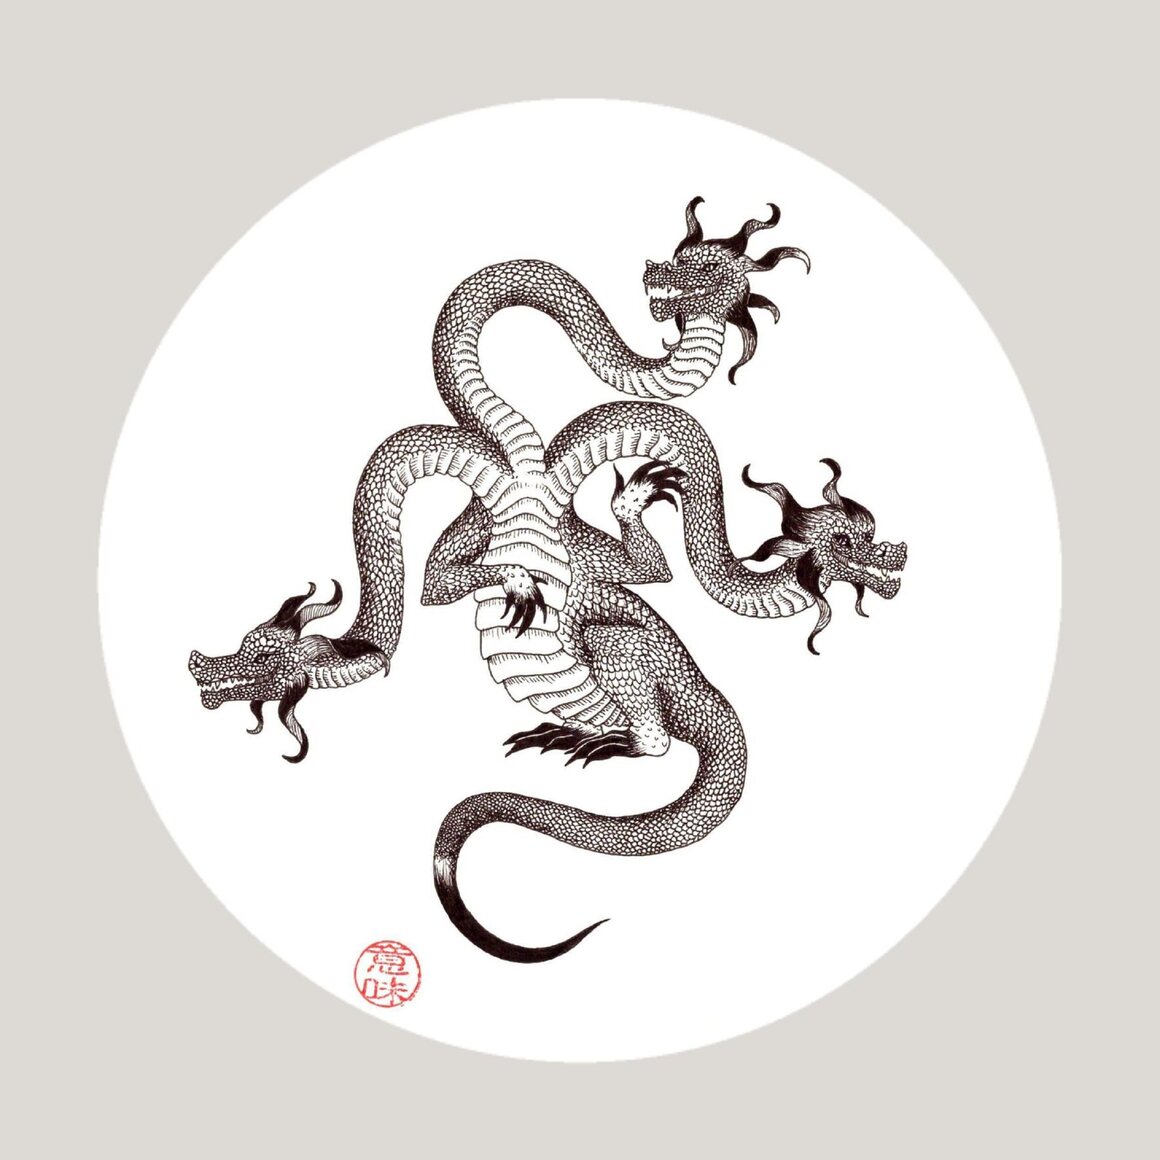 This multi-headed dragon—Zmey Gorynych—features in Slavic mythology. 